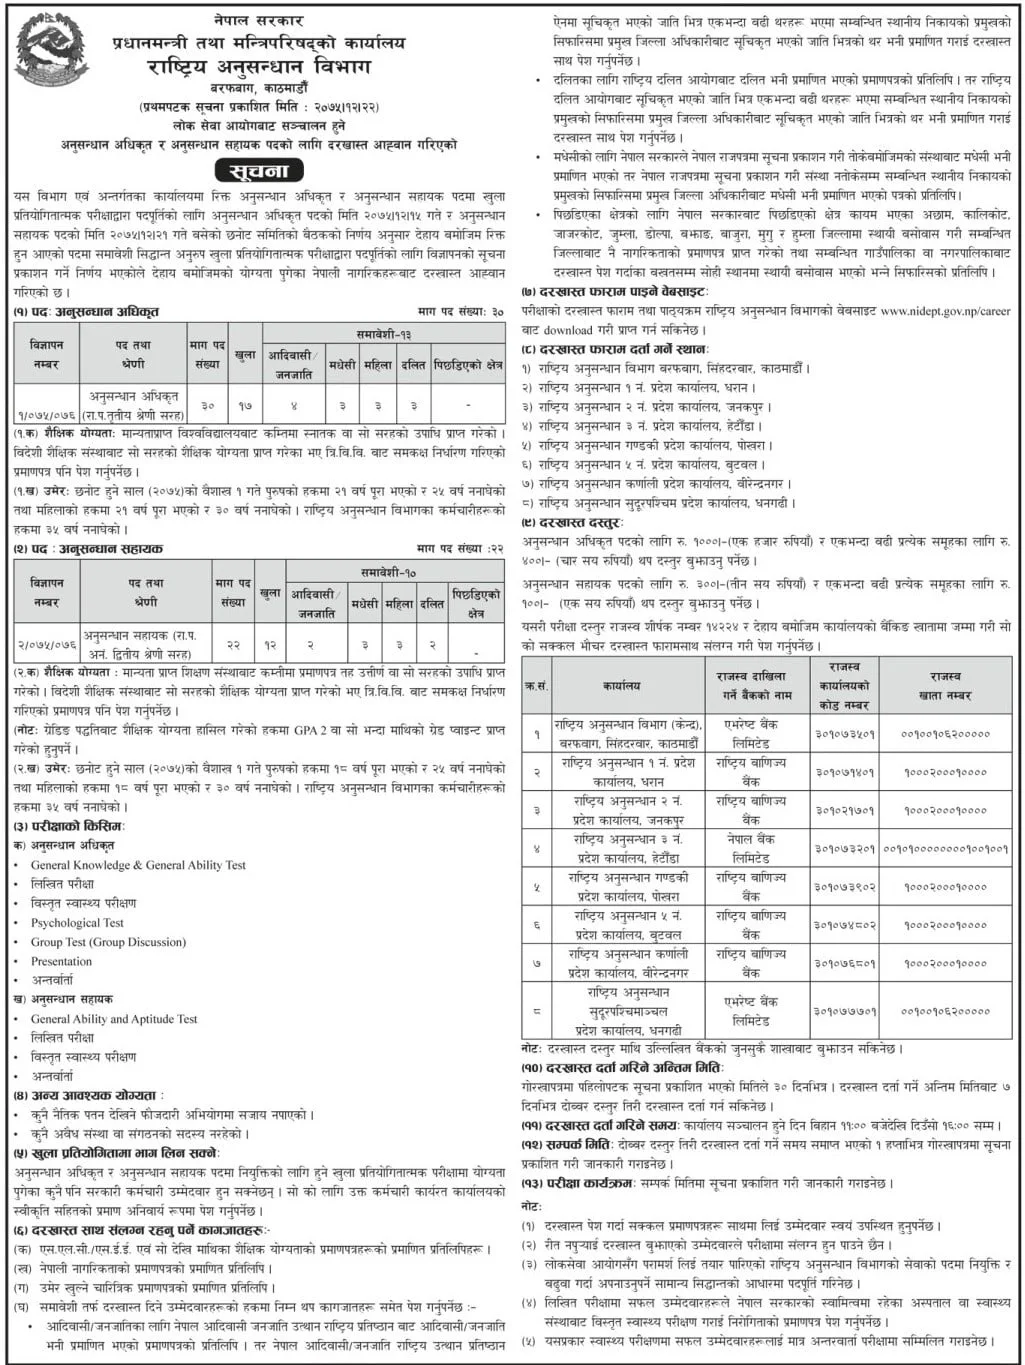 National Investigation Department of Nepal Vacancy Notice